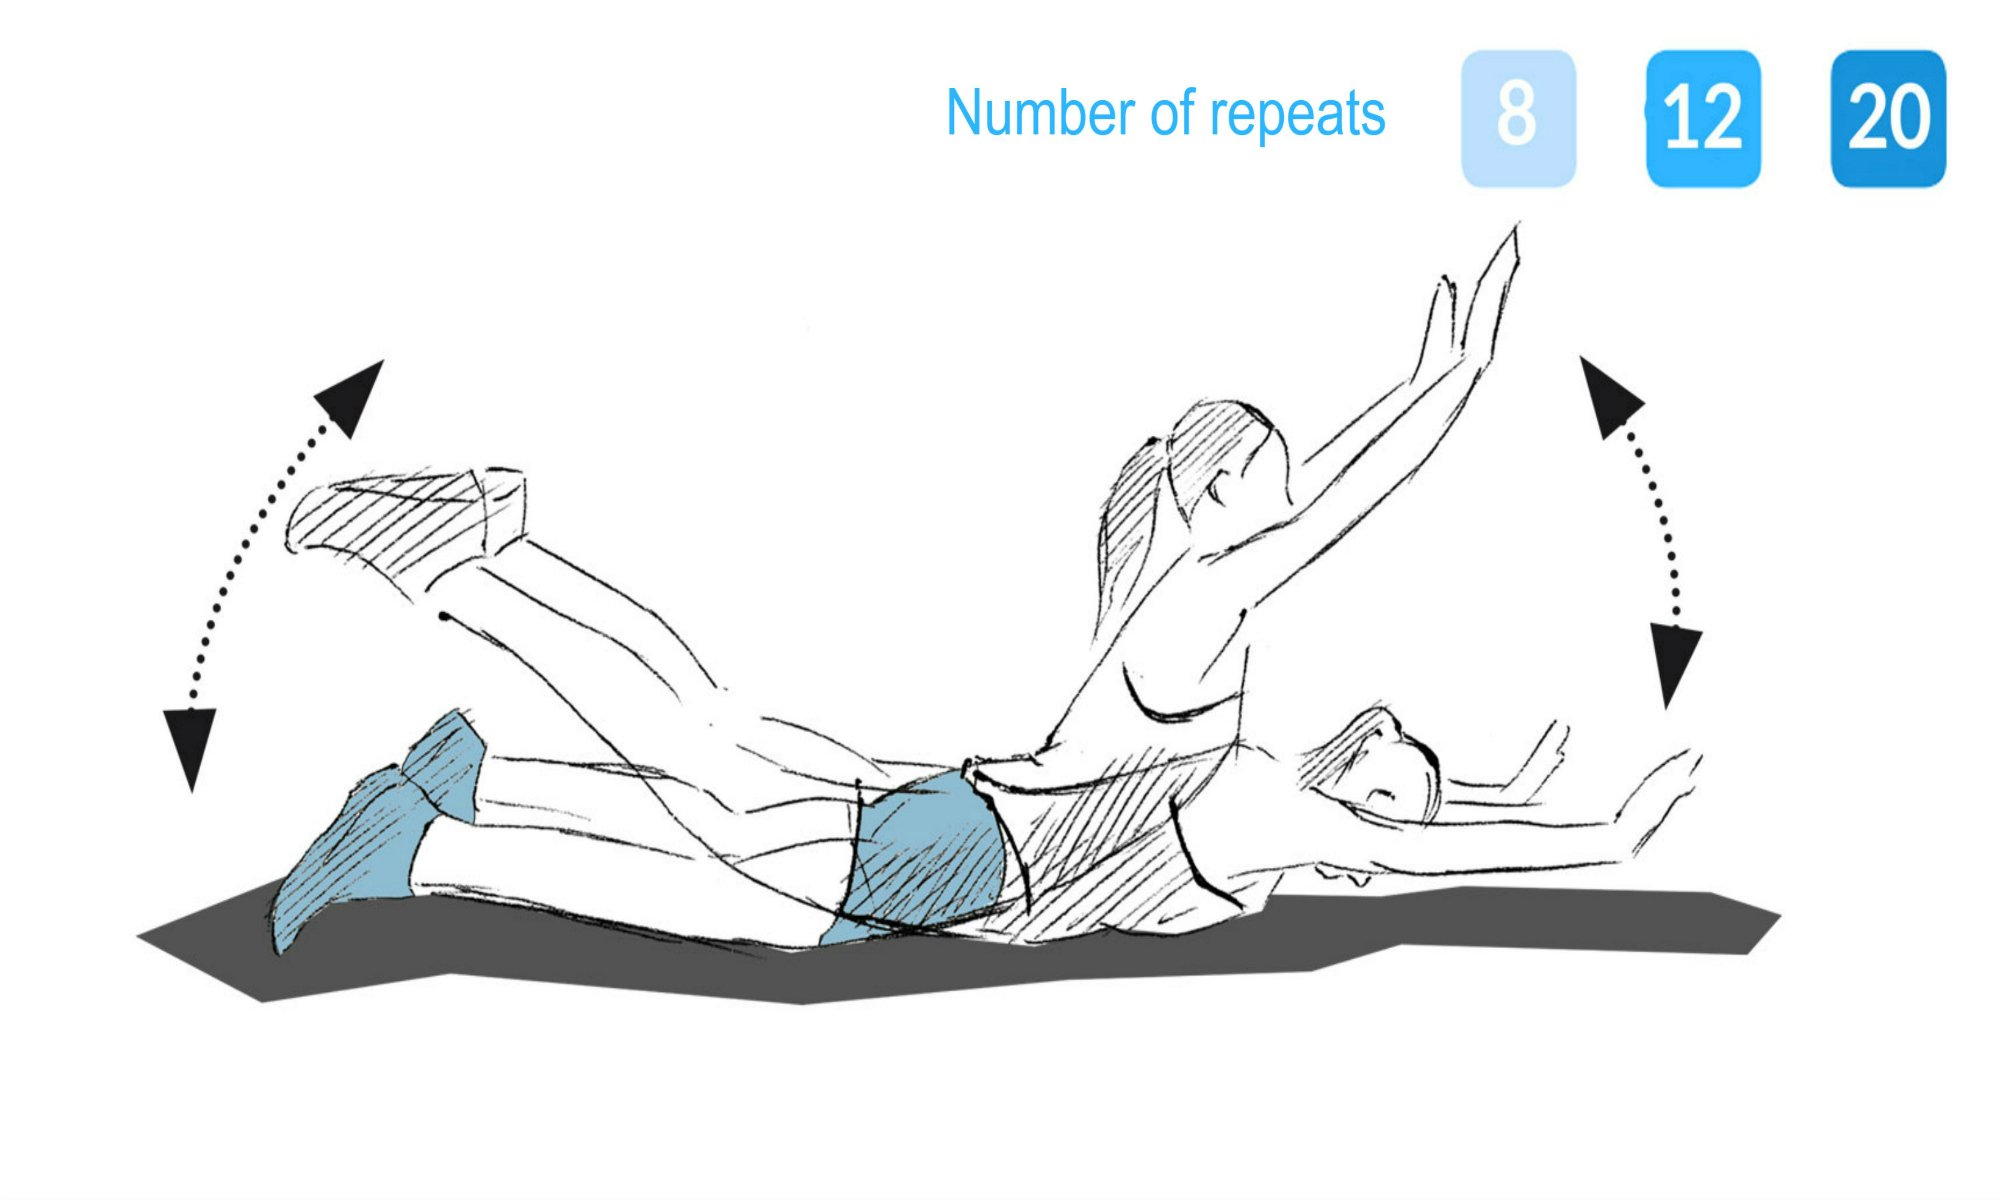 The “rocking cradle” exercise. 